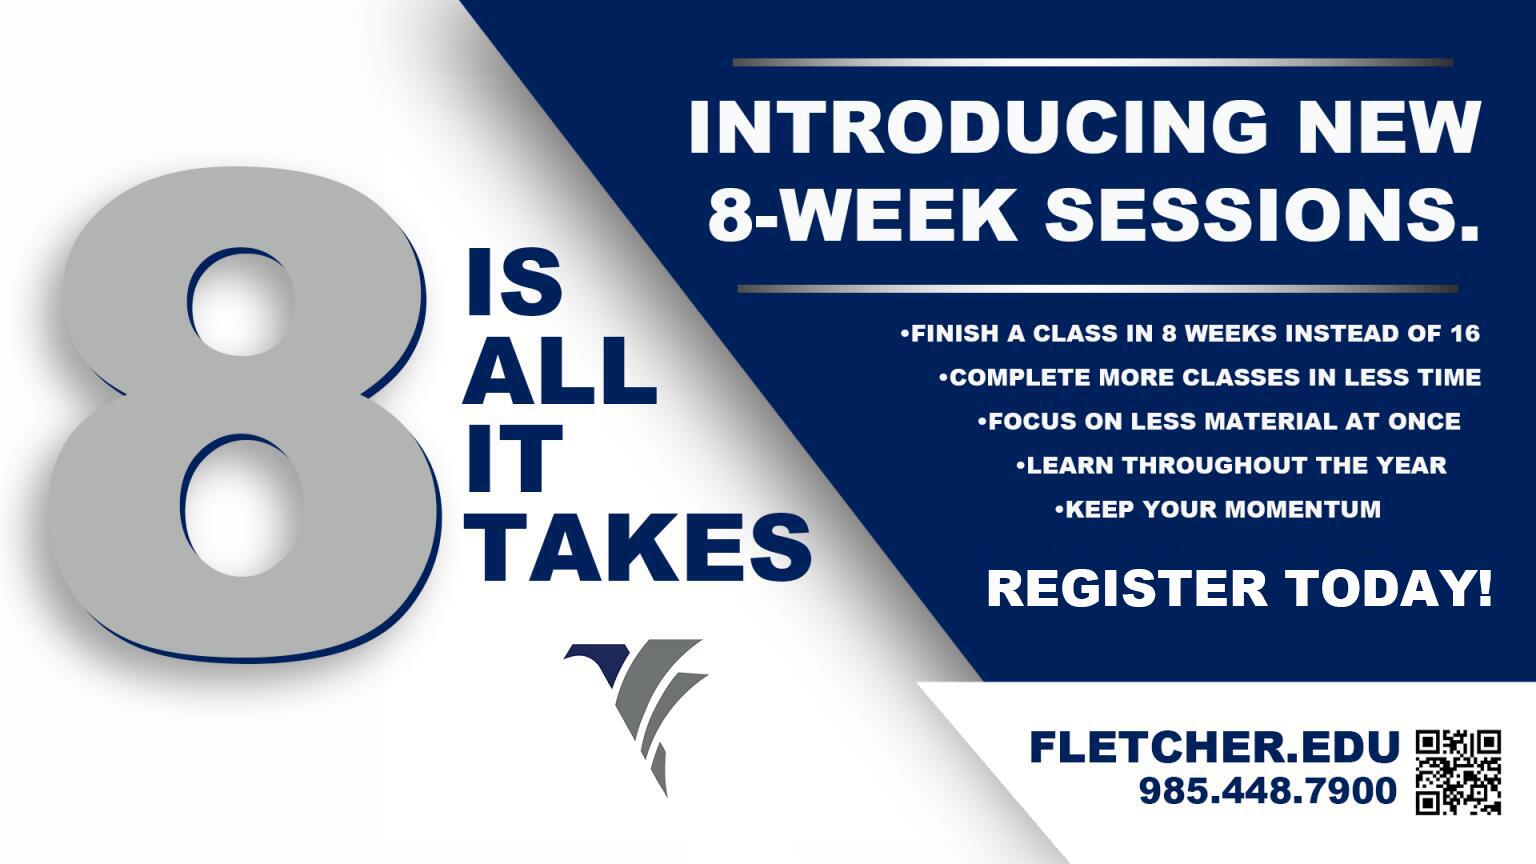 8-WEEK SESSIONS